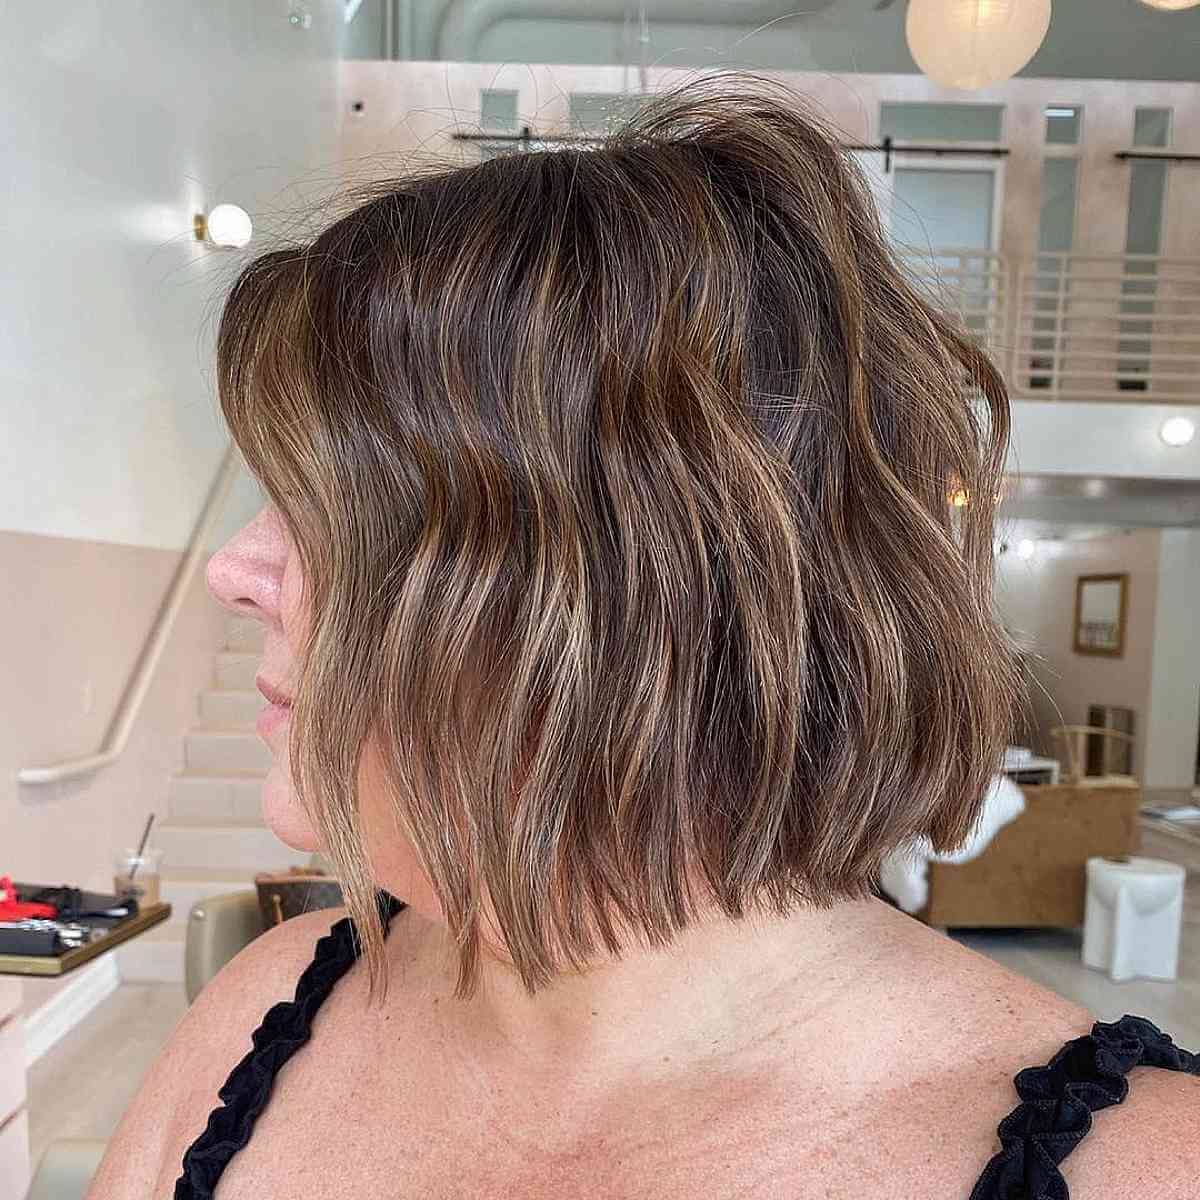 27 Youthful Short Haircuts for Women Over 50